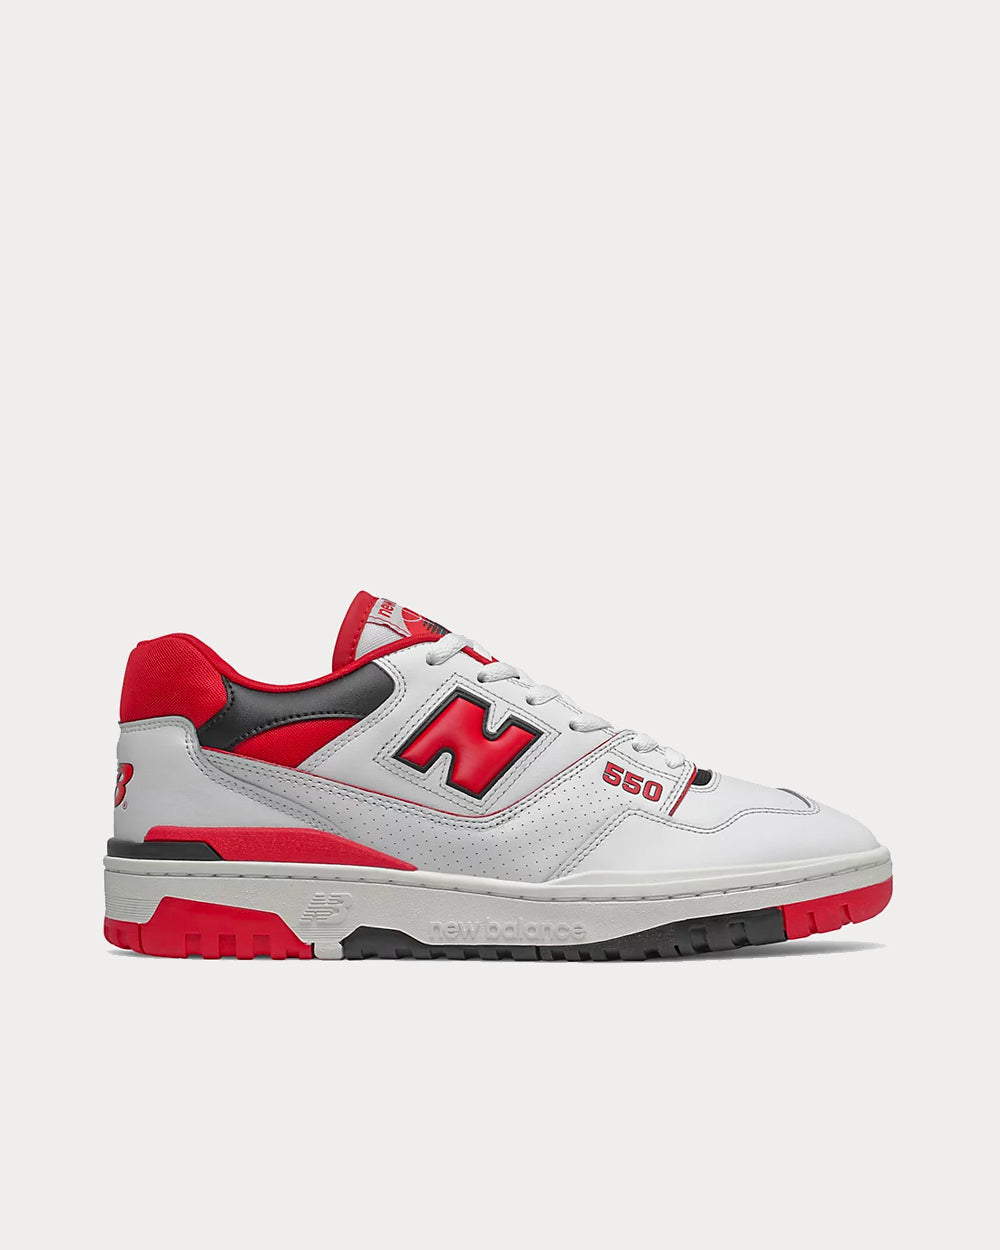 New Balance - 550 Red & White Low Top Sneakers